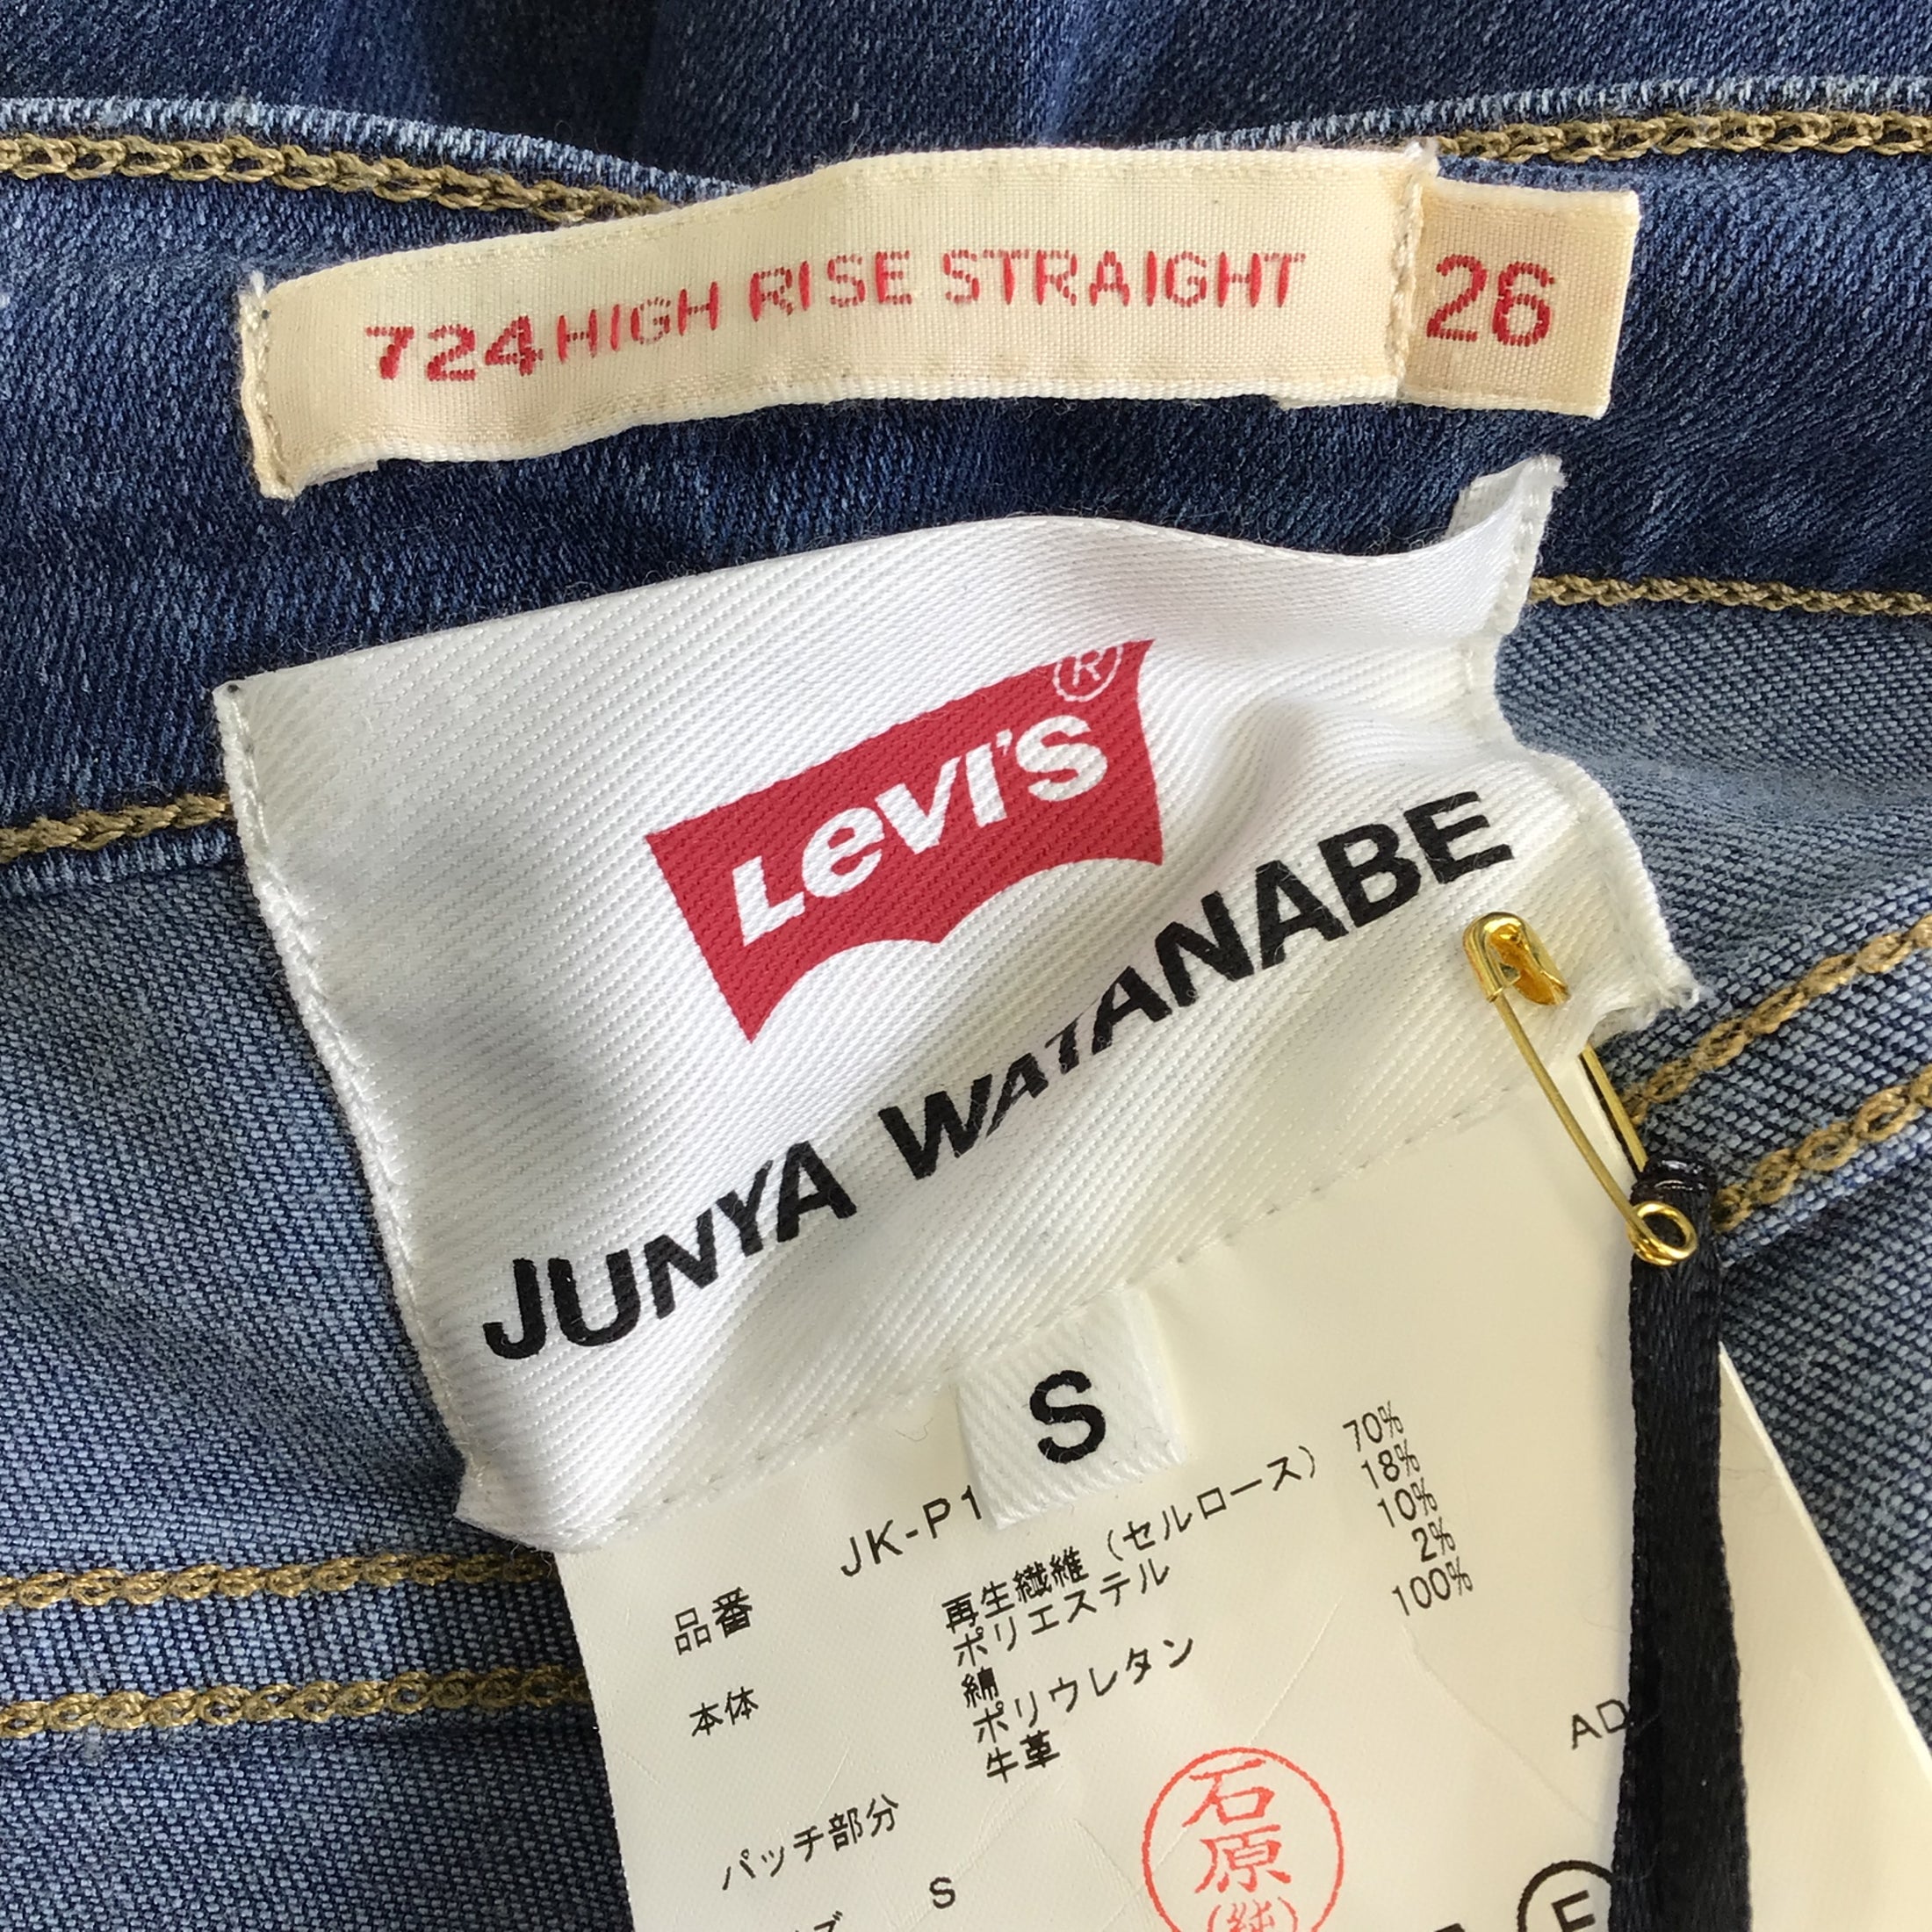 Junya Watanabe x Levis Blue / Silver / Gold Chain and Pearl Embellished 724 High Rise Straight Leg Jeans